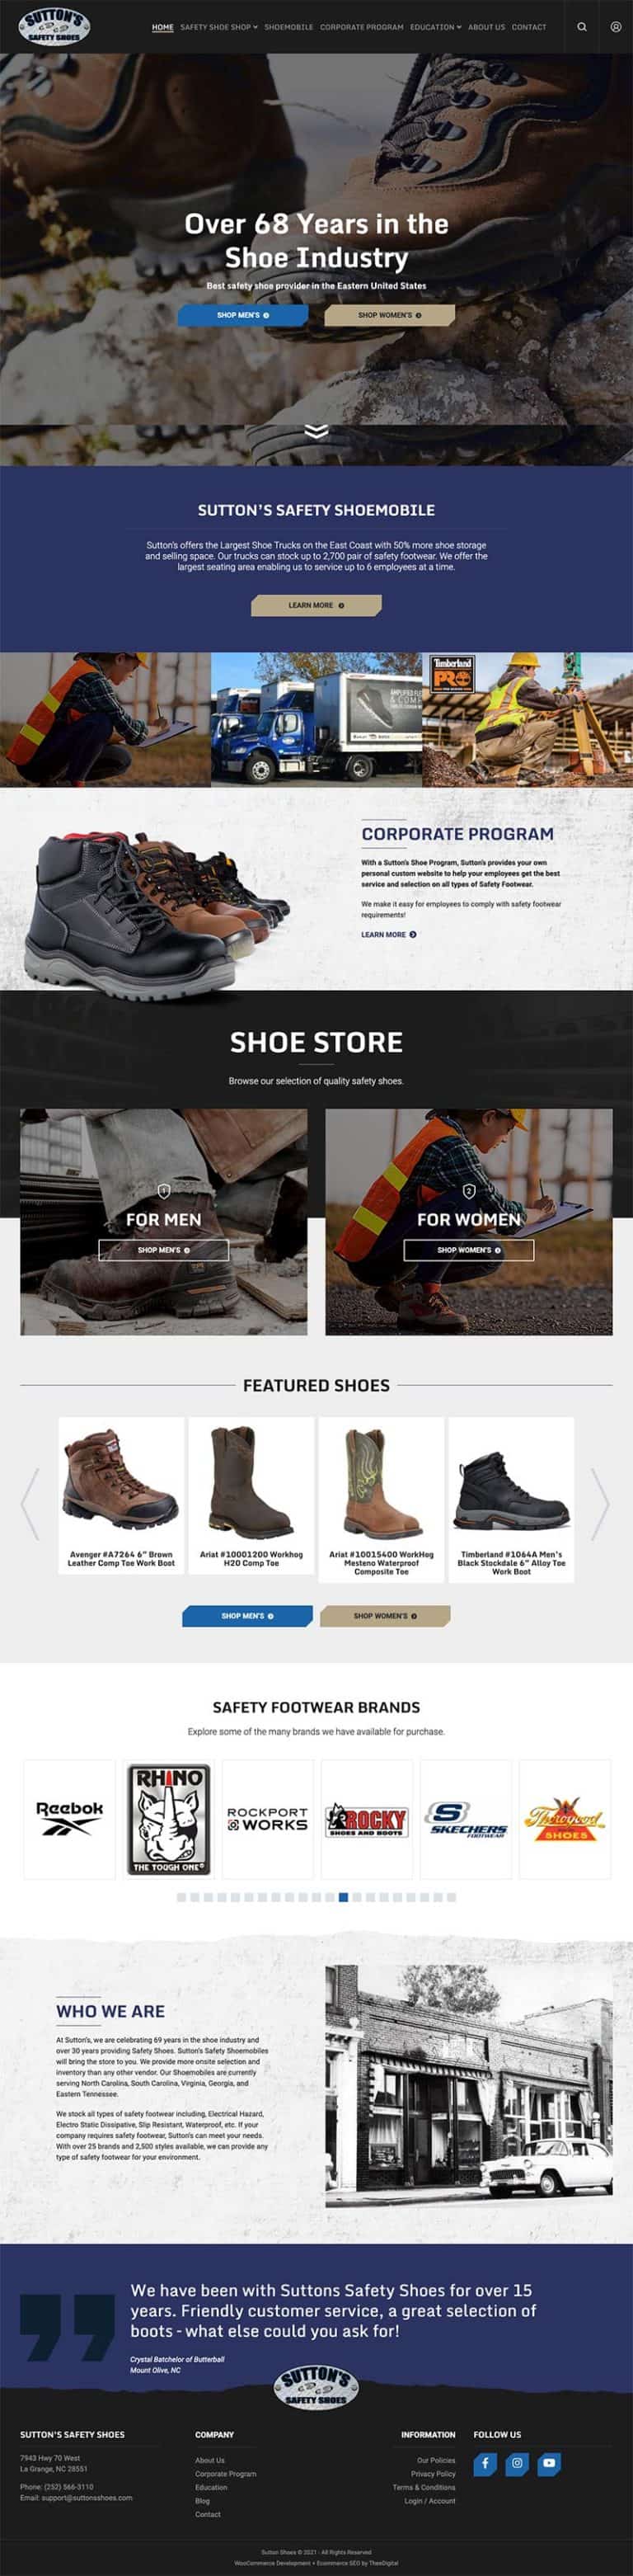 Mobile Friendly Web Design Ecommerce SEO for a Retail Shoe Business